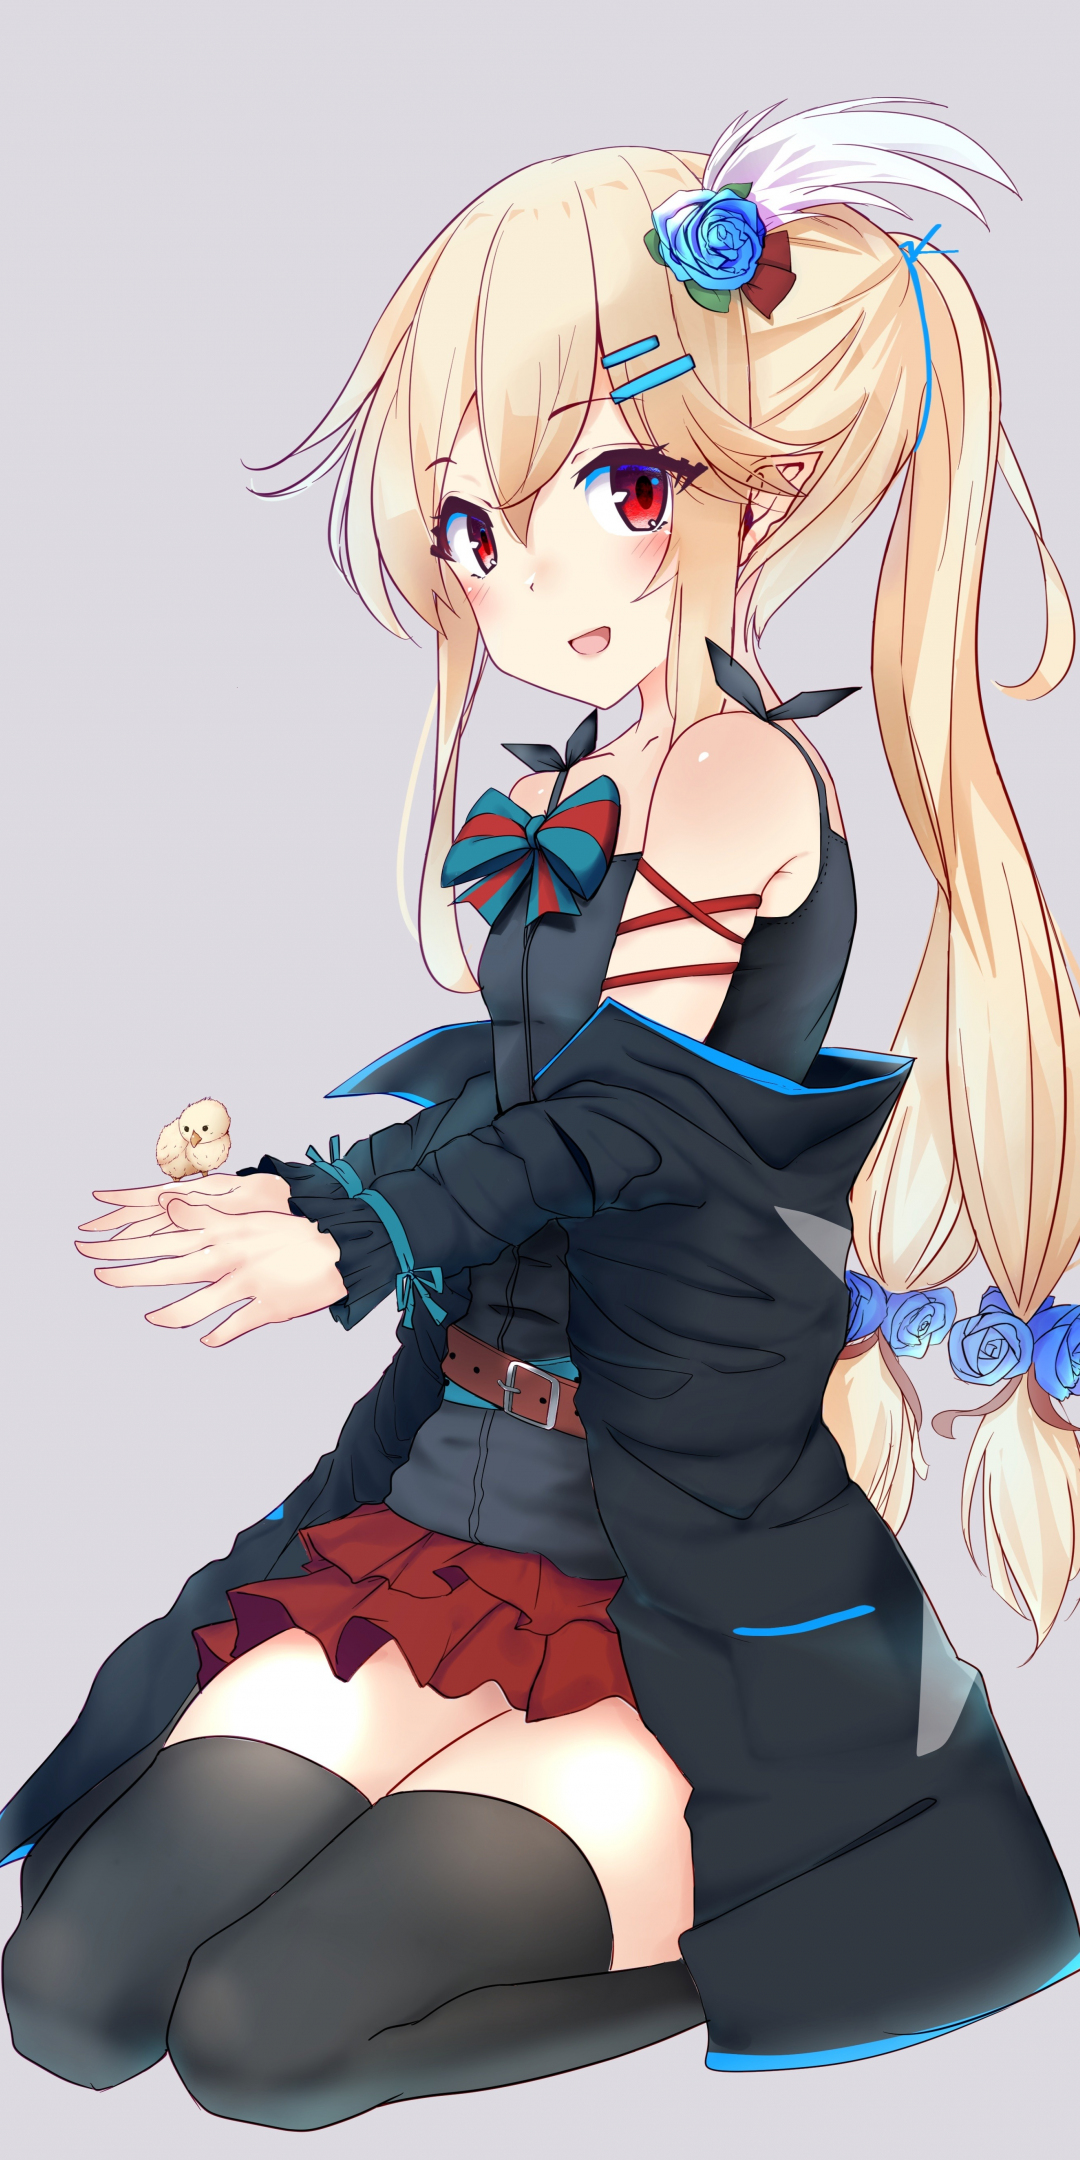 Pony tails, blonde, cute girl, anime, 1080x2160 wallpaper